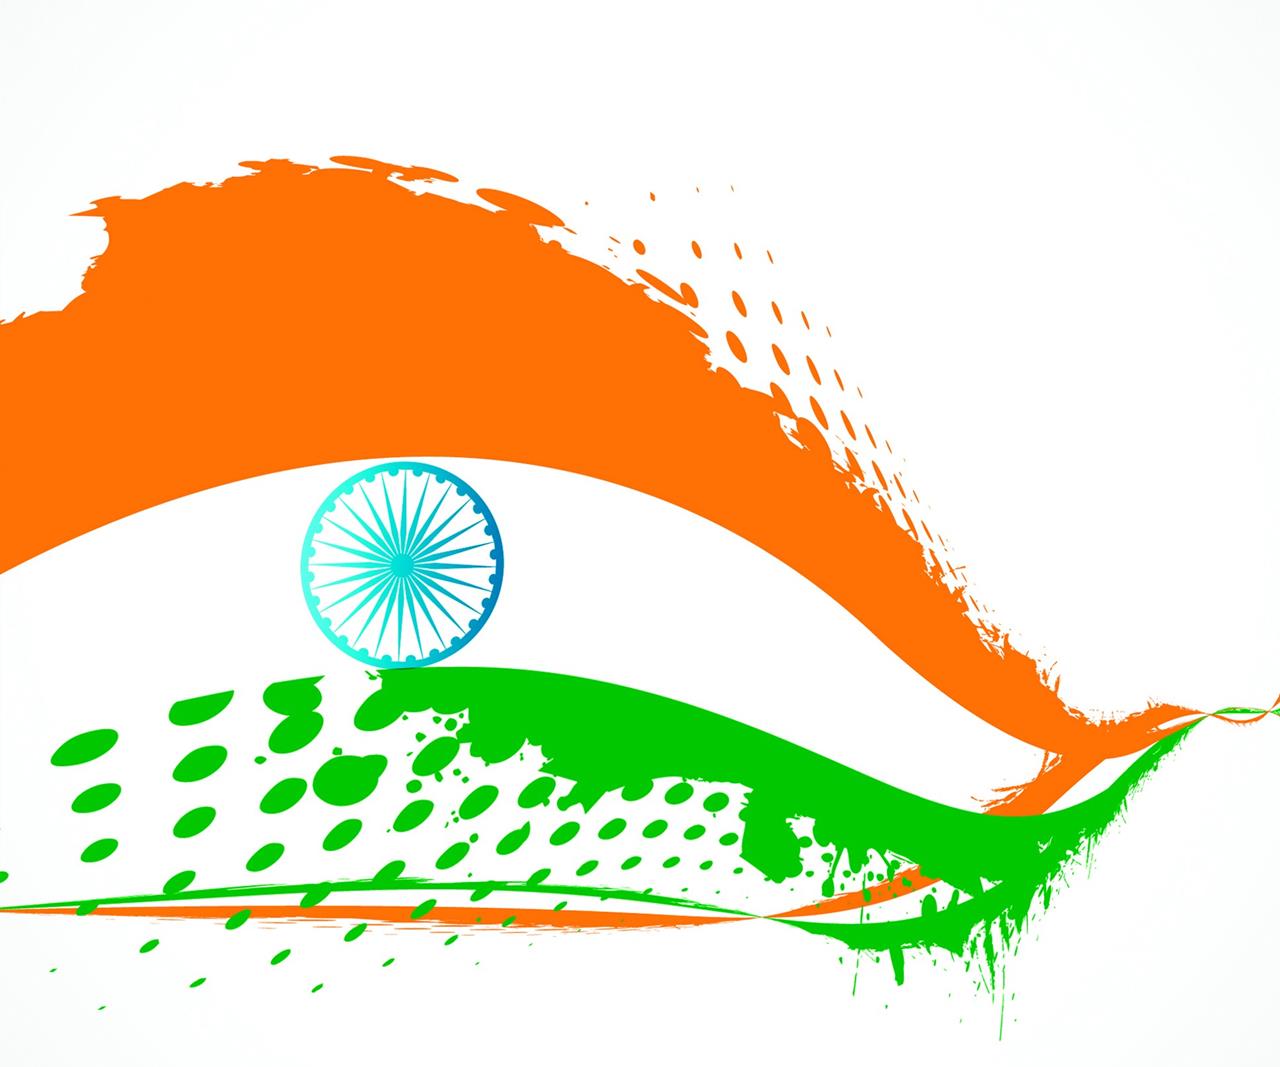 Happy Independence Day India Wallpapers - 15 August 2014 ...